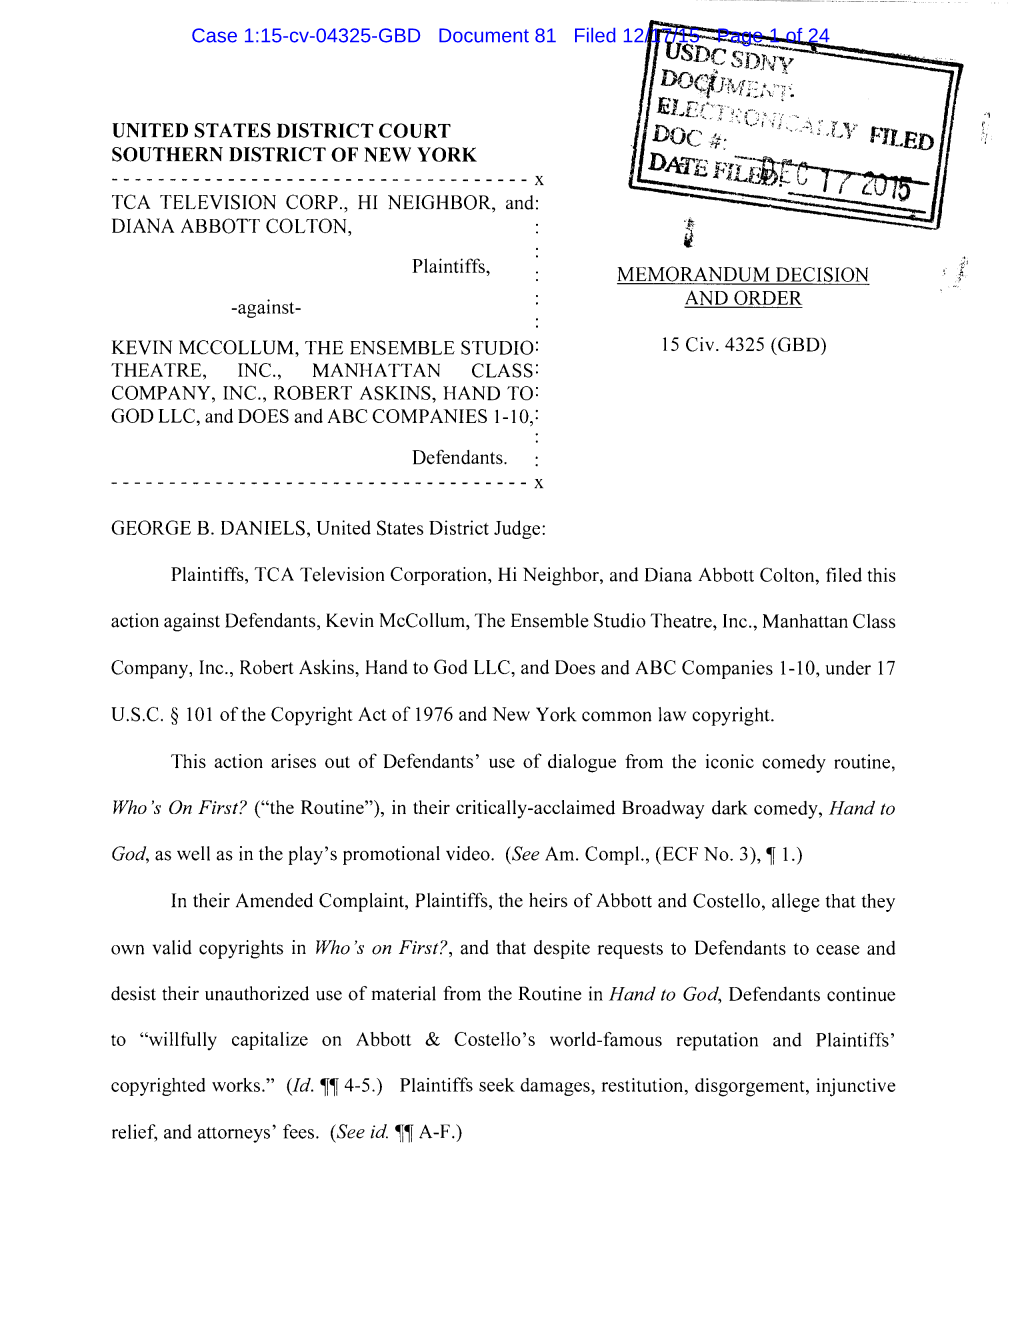 ~ Case 1:15-Cv-04325-GBD Document 81 Filed 12/17/15 Page